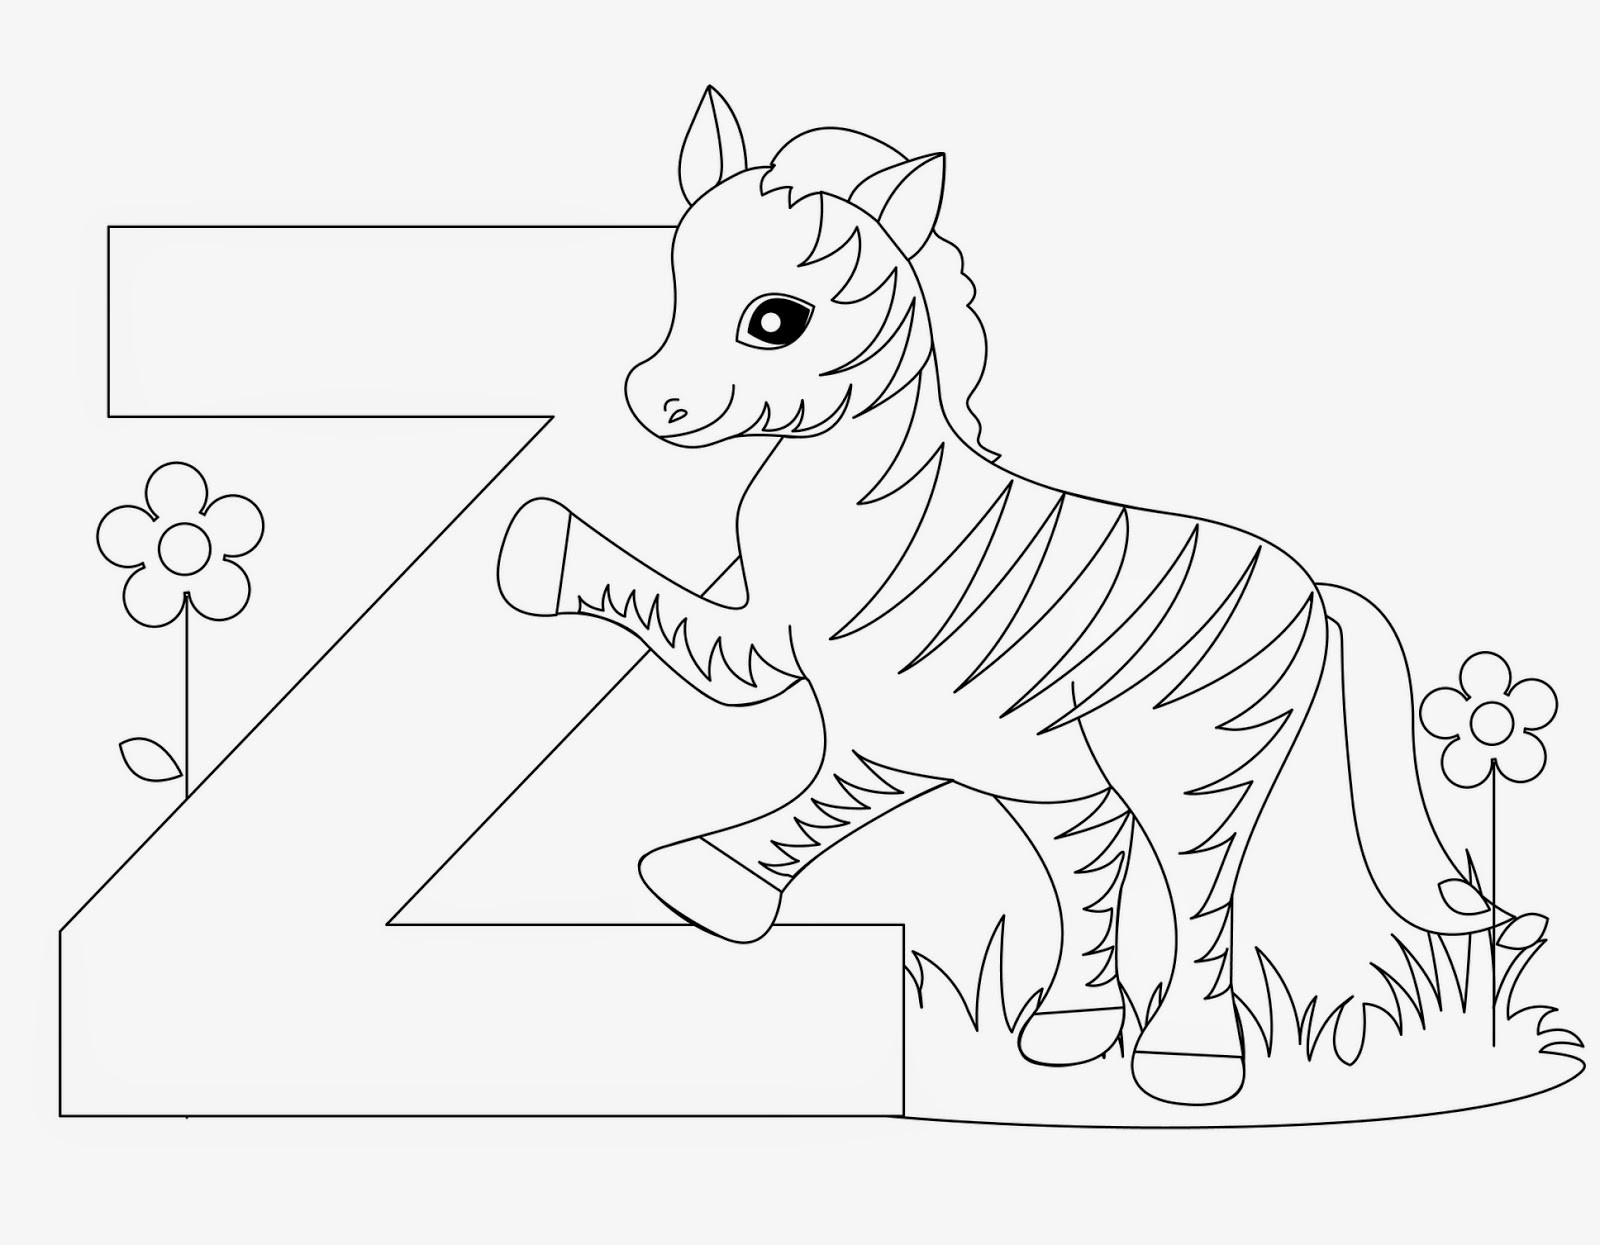 Alphabet Coloring Pages For Toddlers
 Kids Page Z is for Zebra Animal Alphabet Letters Worksheet